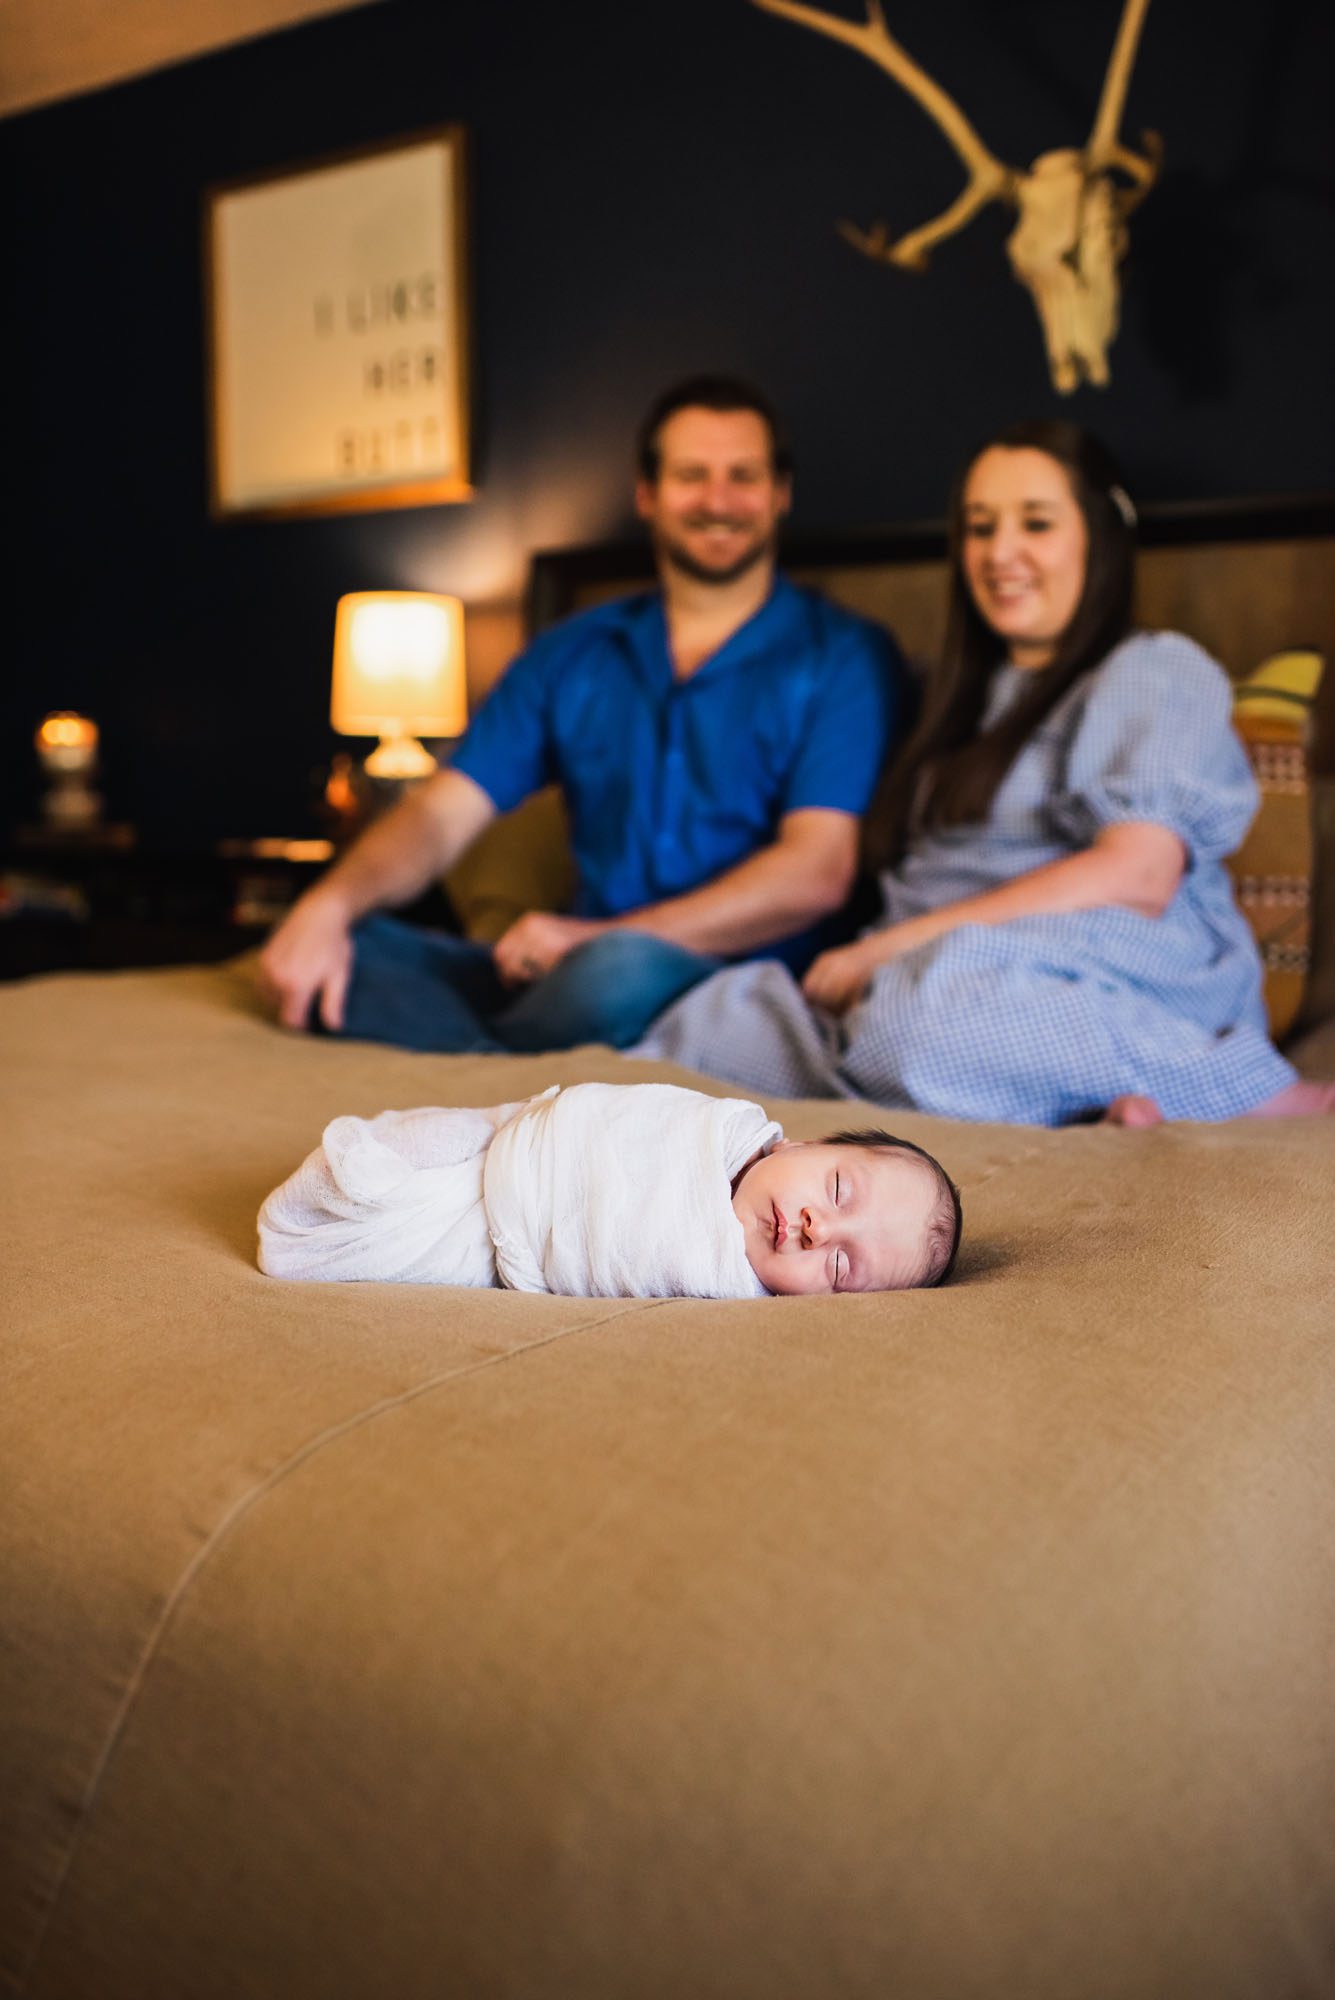 San Antonio Newborn Photographer, baby sleeping on bed with parents in the background